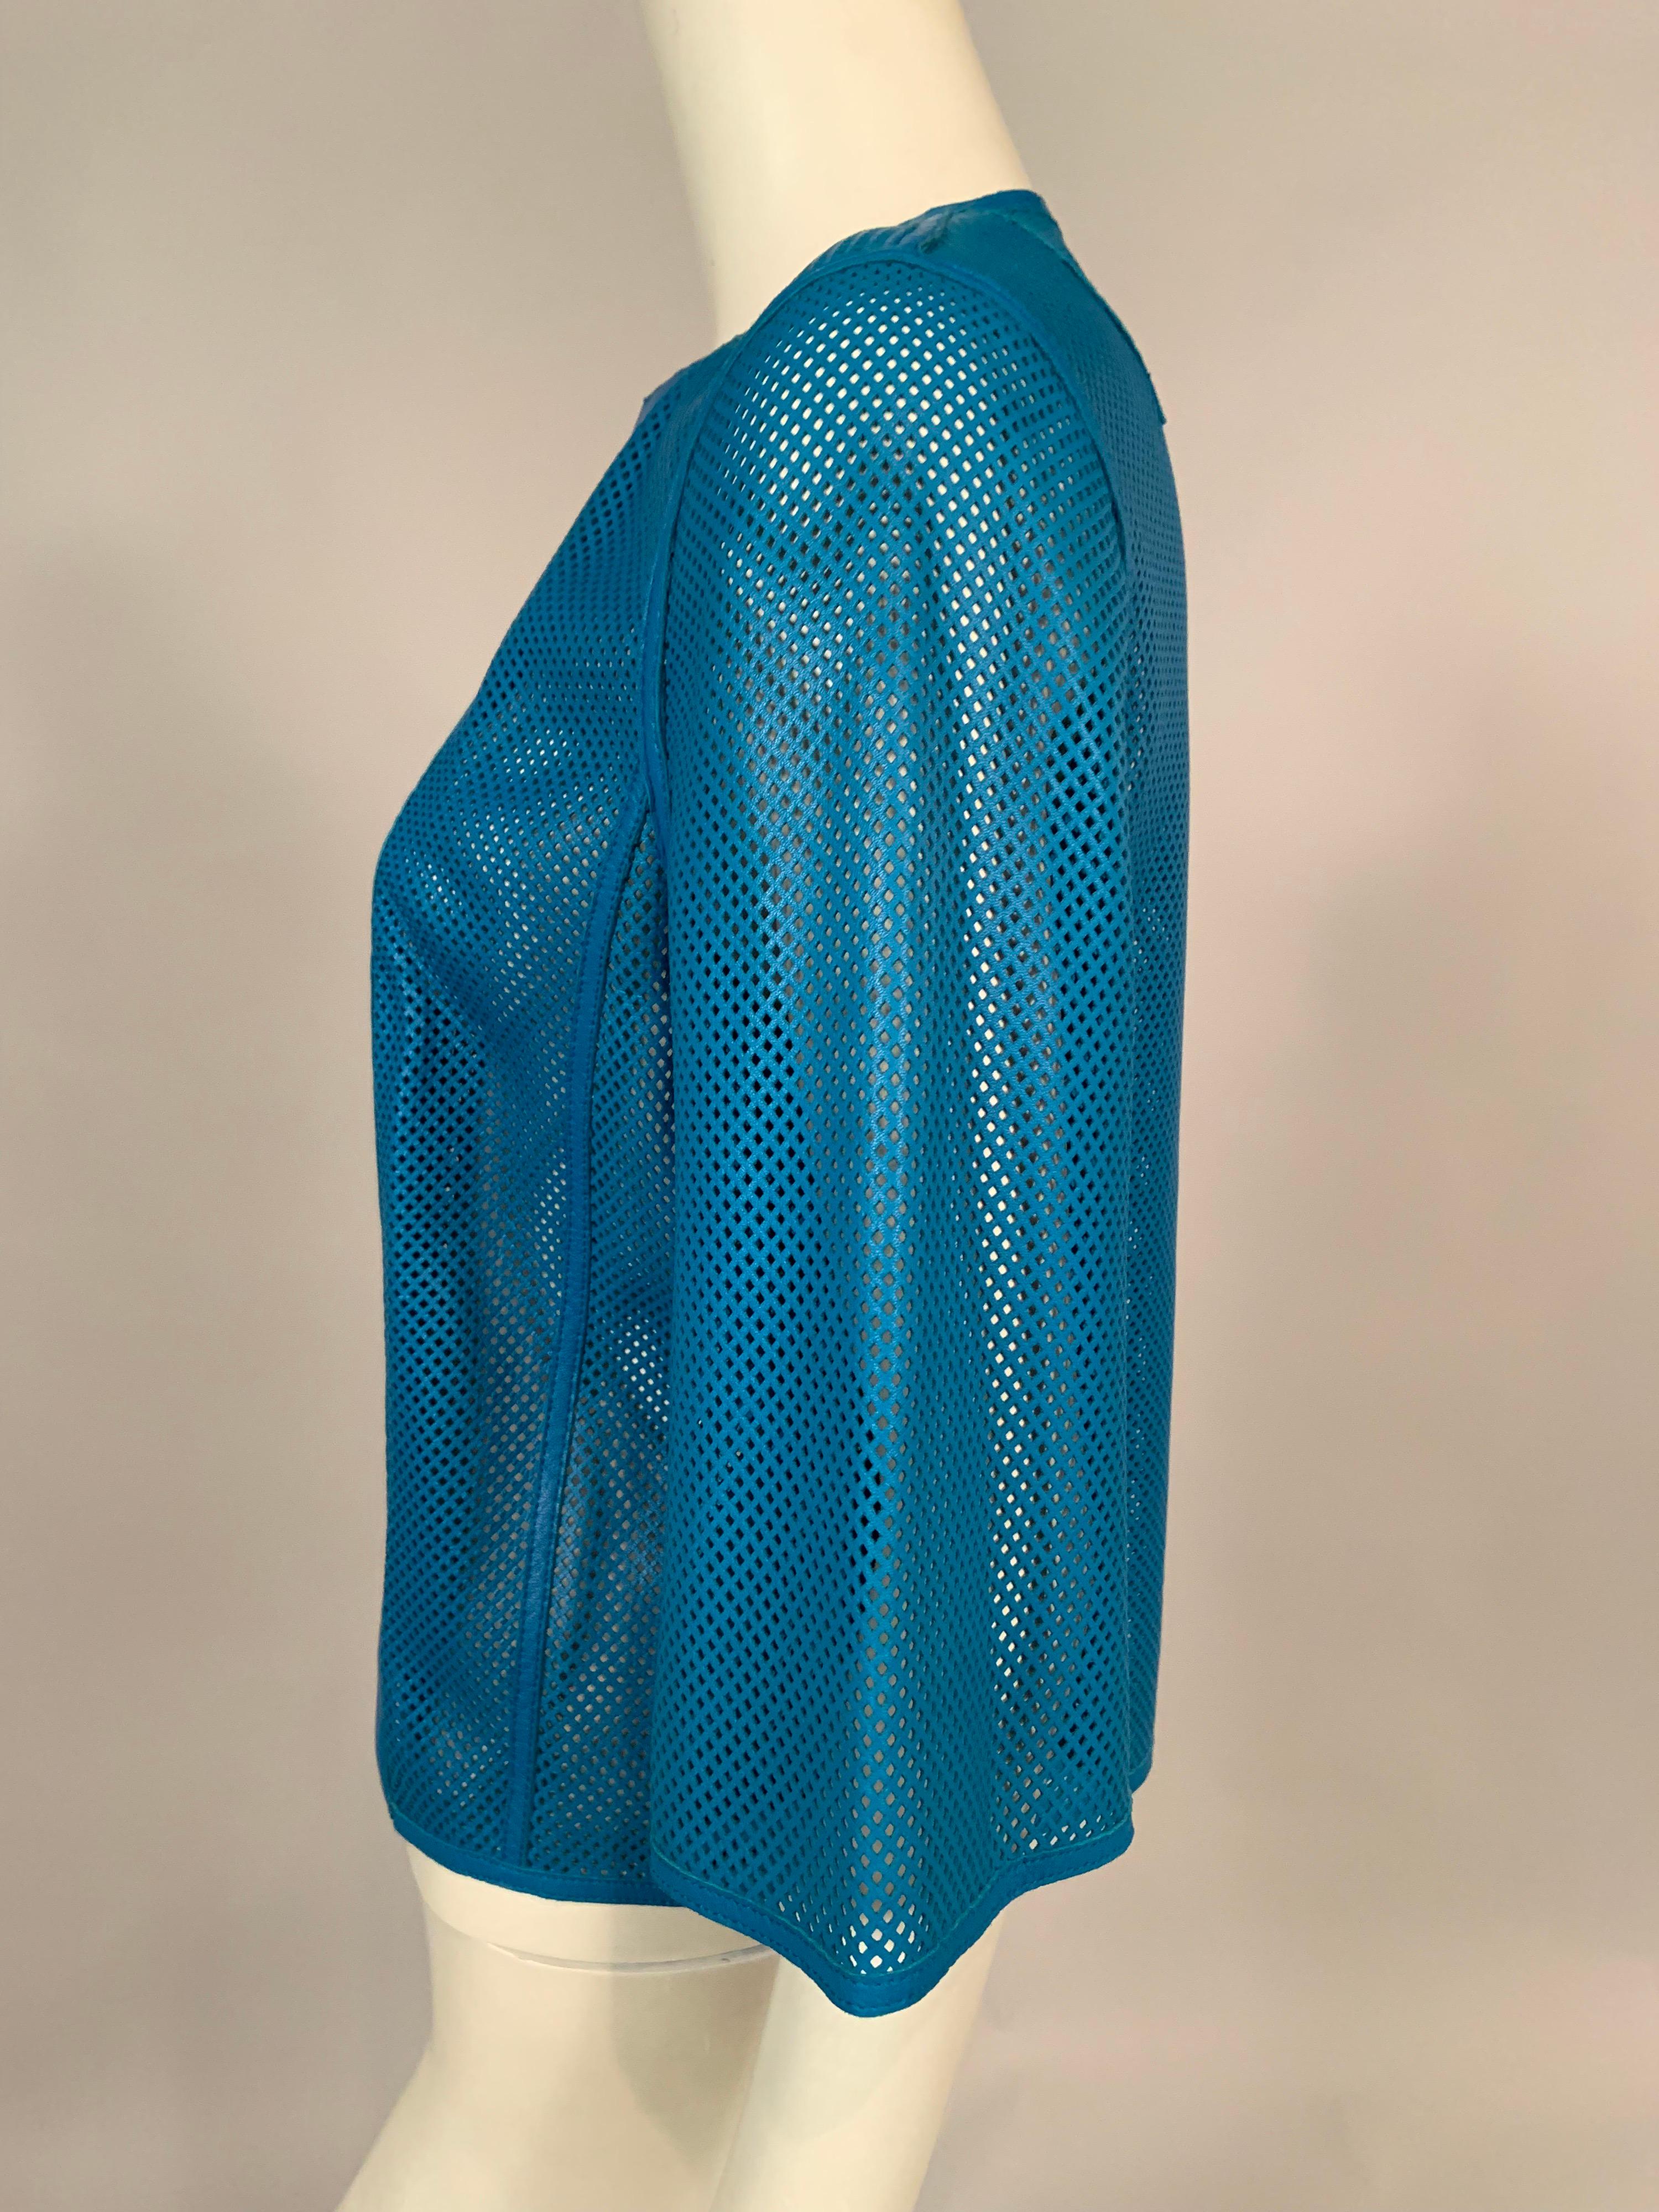 Akris buttery soft lambskin jacket in a gorgeous rich shade of blue is perforated tiny diamond shapes everywhere but the center front panels. It is so soft and light weight, and adds a great pop of color to any outfit. The jacket is in pristine